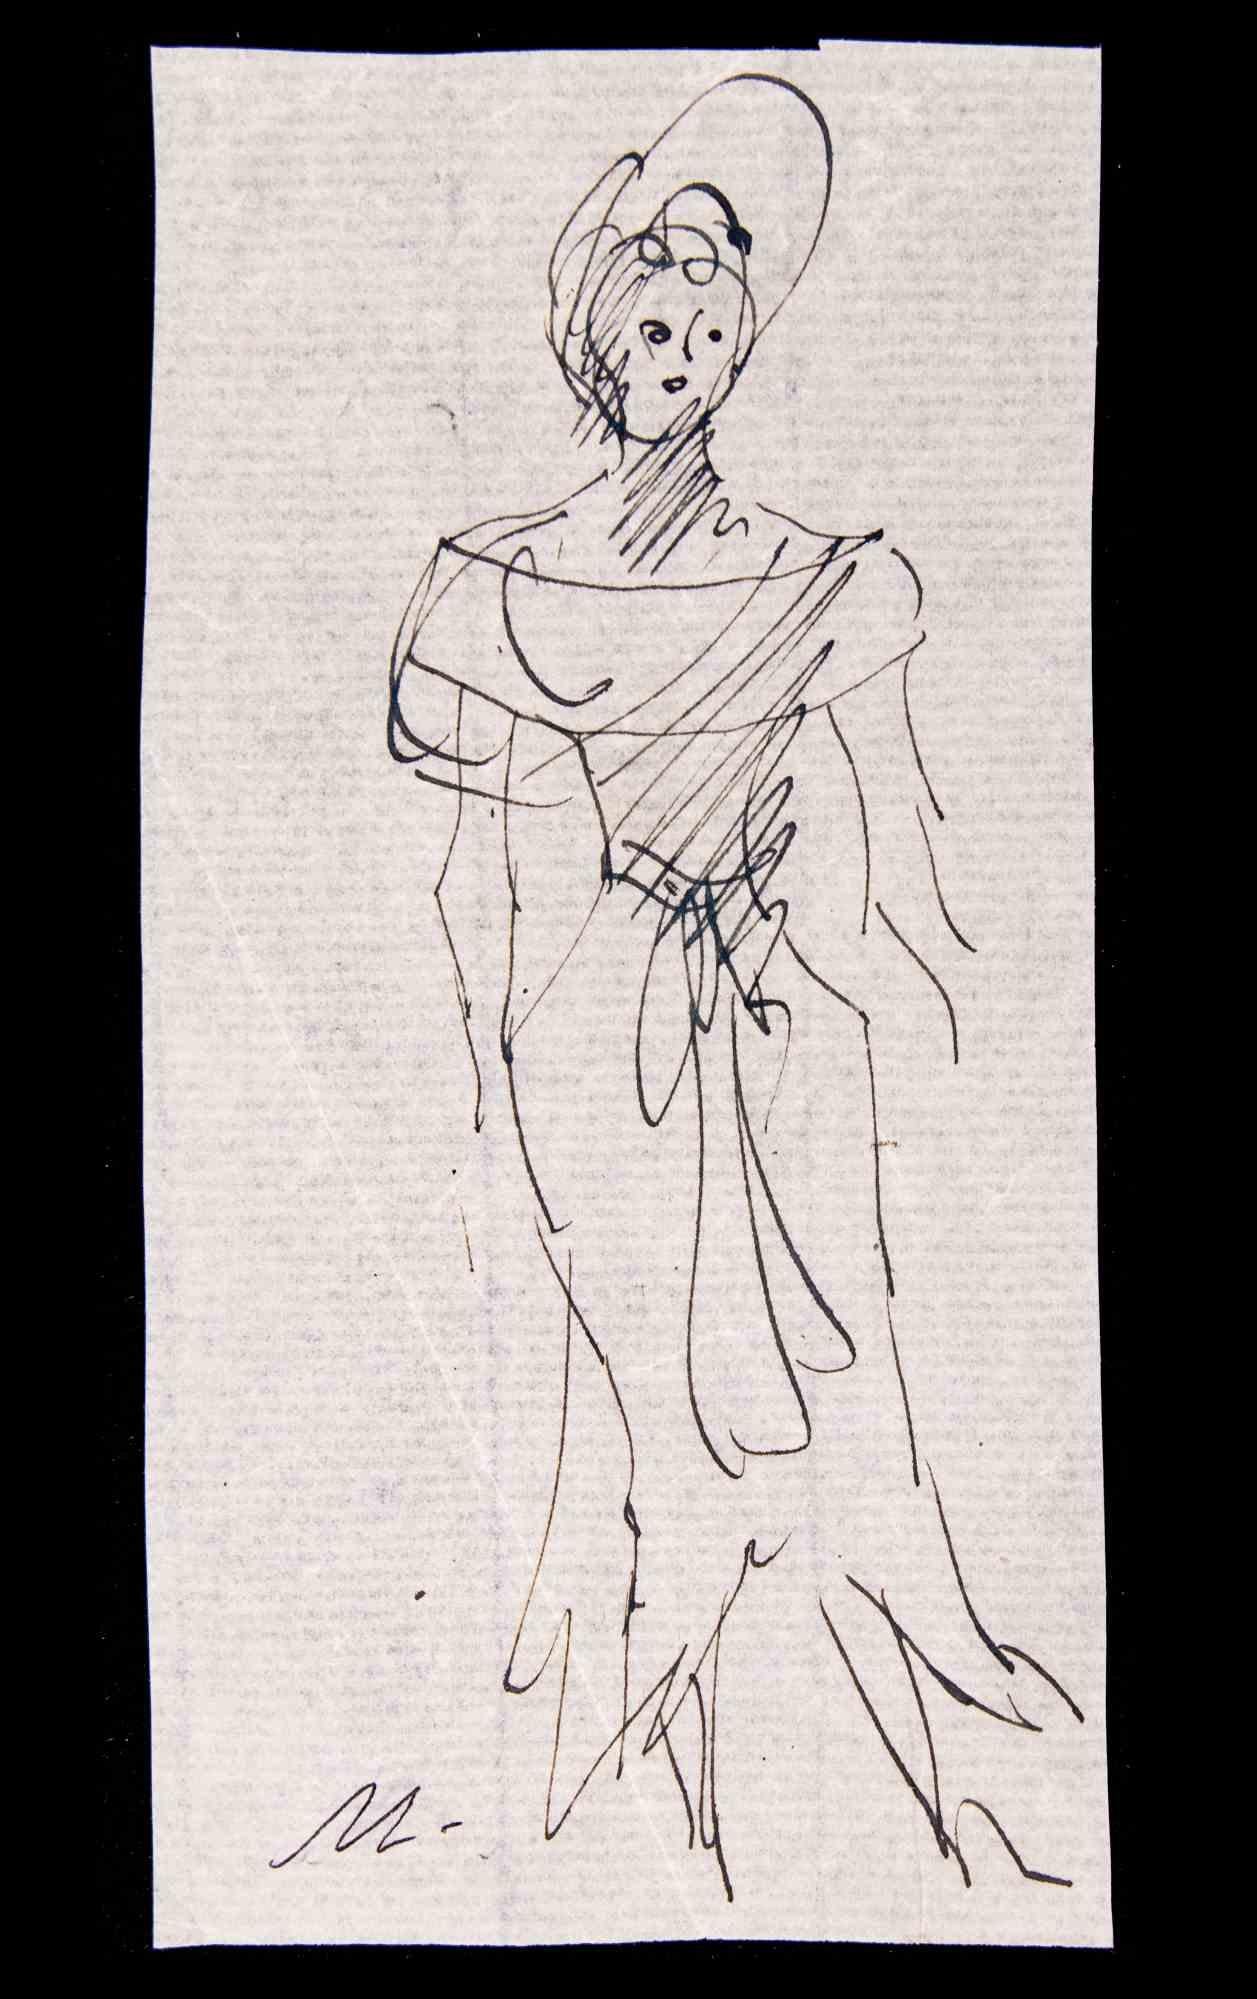 Figure of Woman is a Pen Drawing realized by Mino Maccari  (1924-1989) in 1935s.

Hand-signed on the lower margin.

Good condition on a little yellowed paper.

Mino Maccari (Siena, 1924-Rome, June 16, 1989) was an Italian writer, painter, engraver